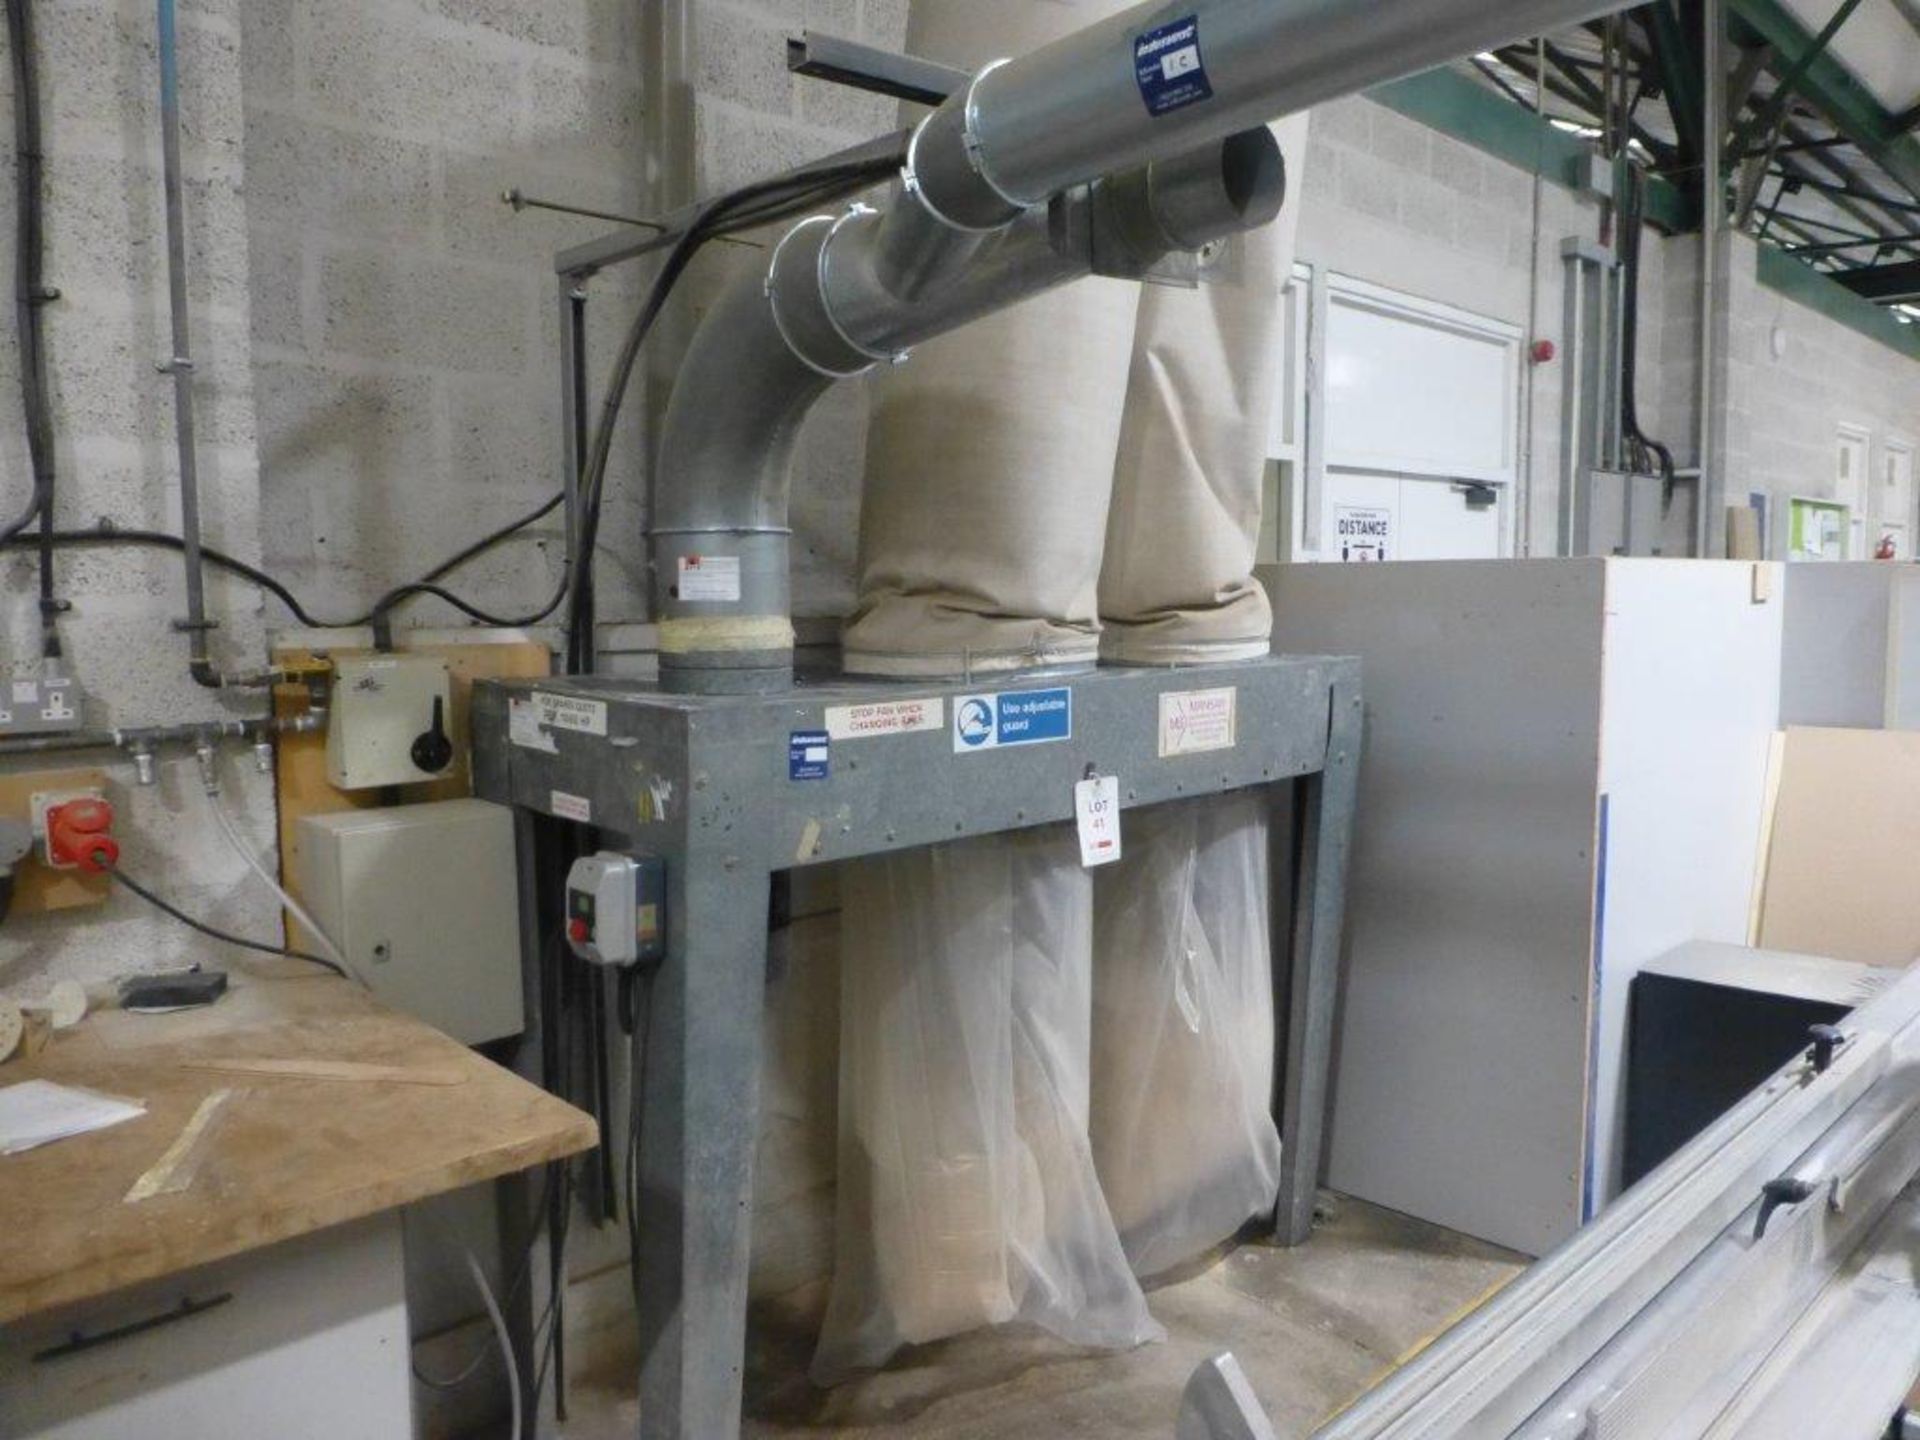 Mansaw dust collector - Image 2 of 2